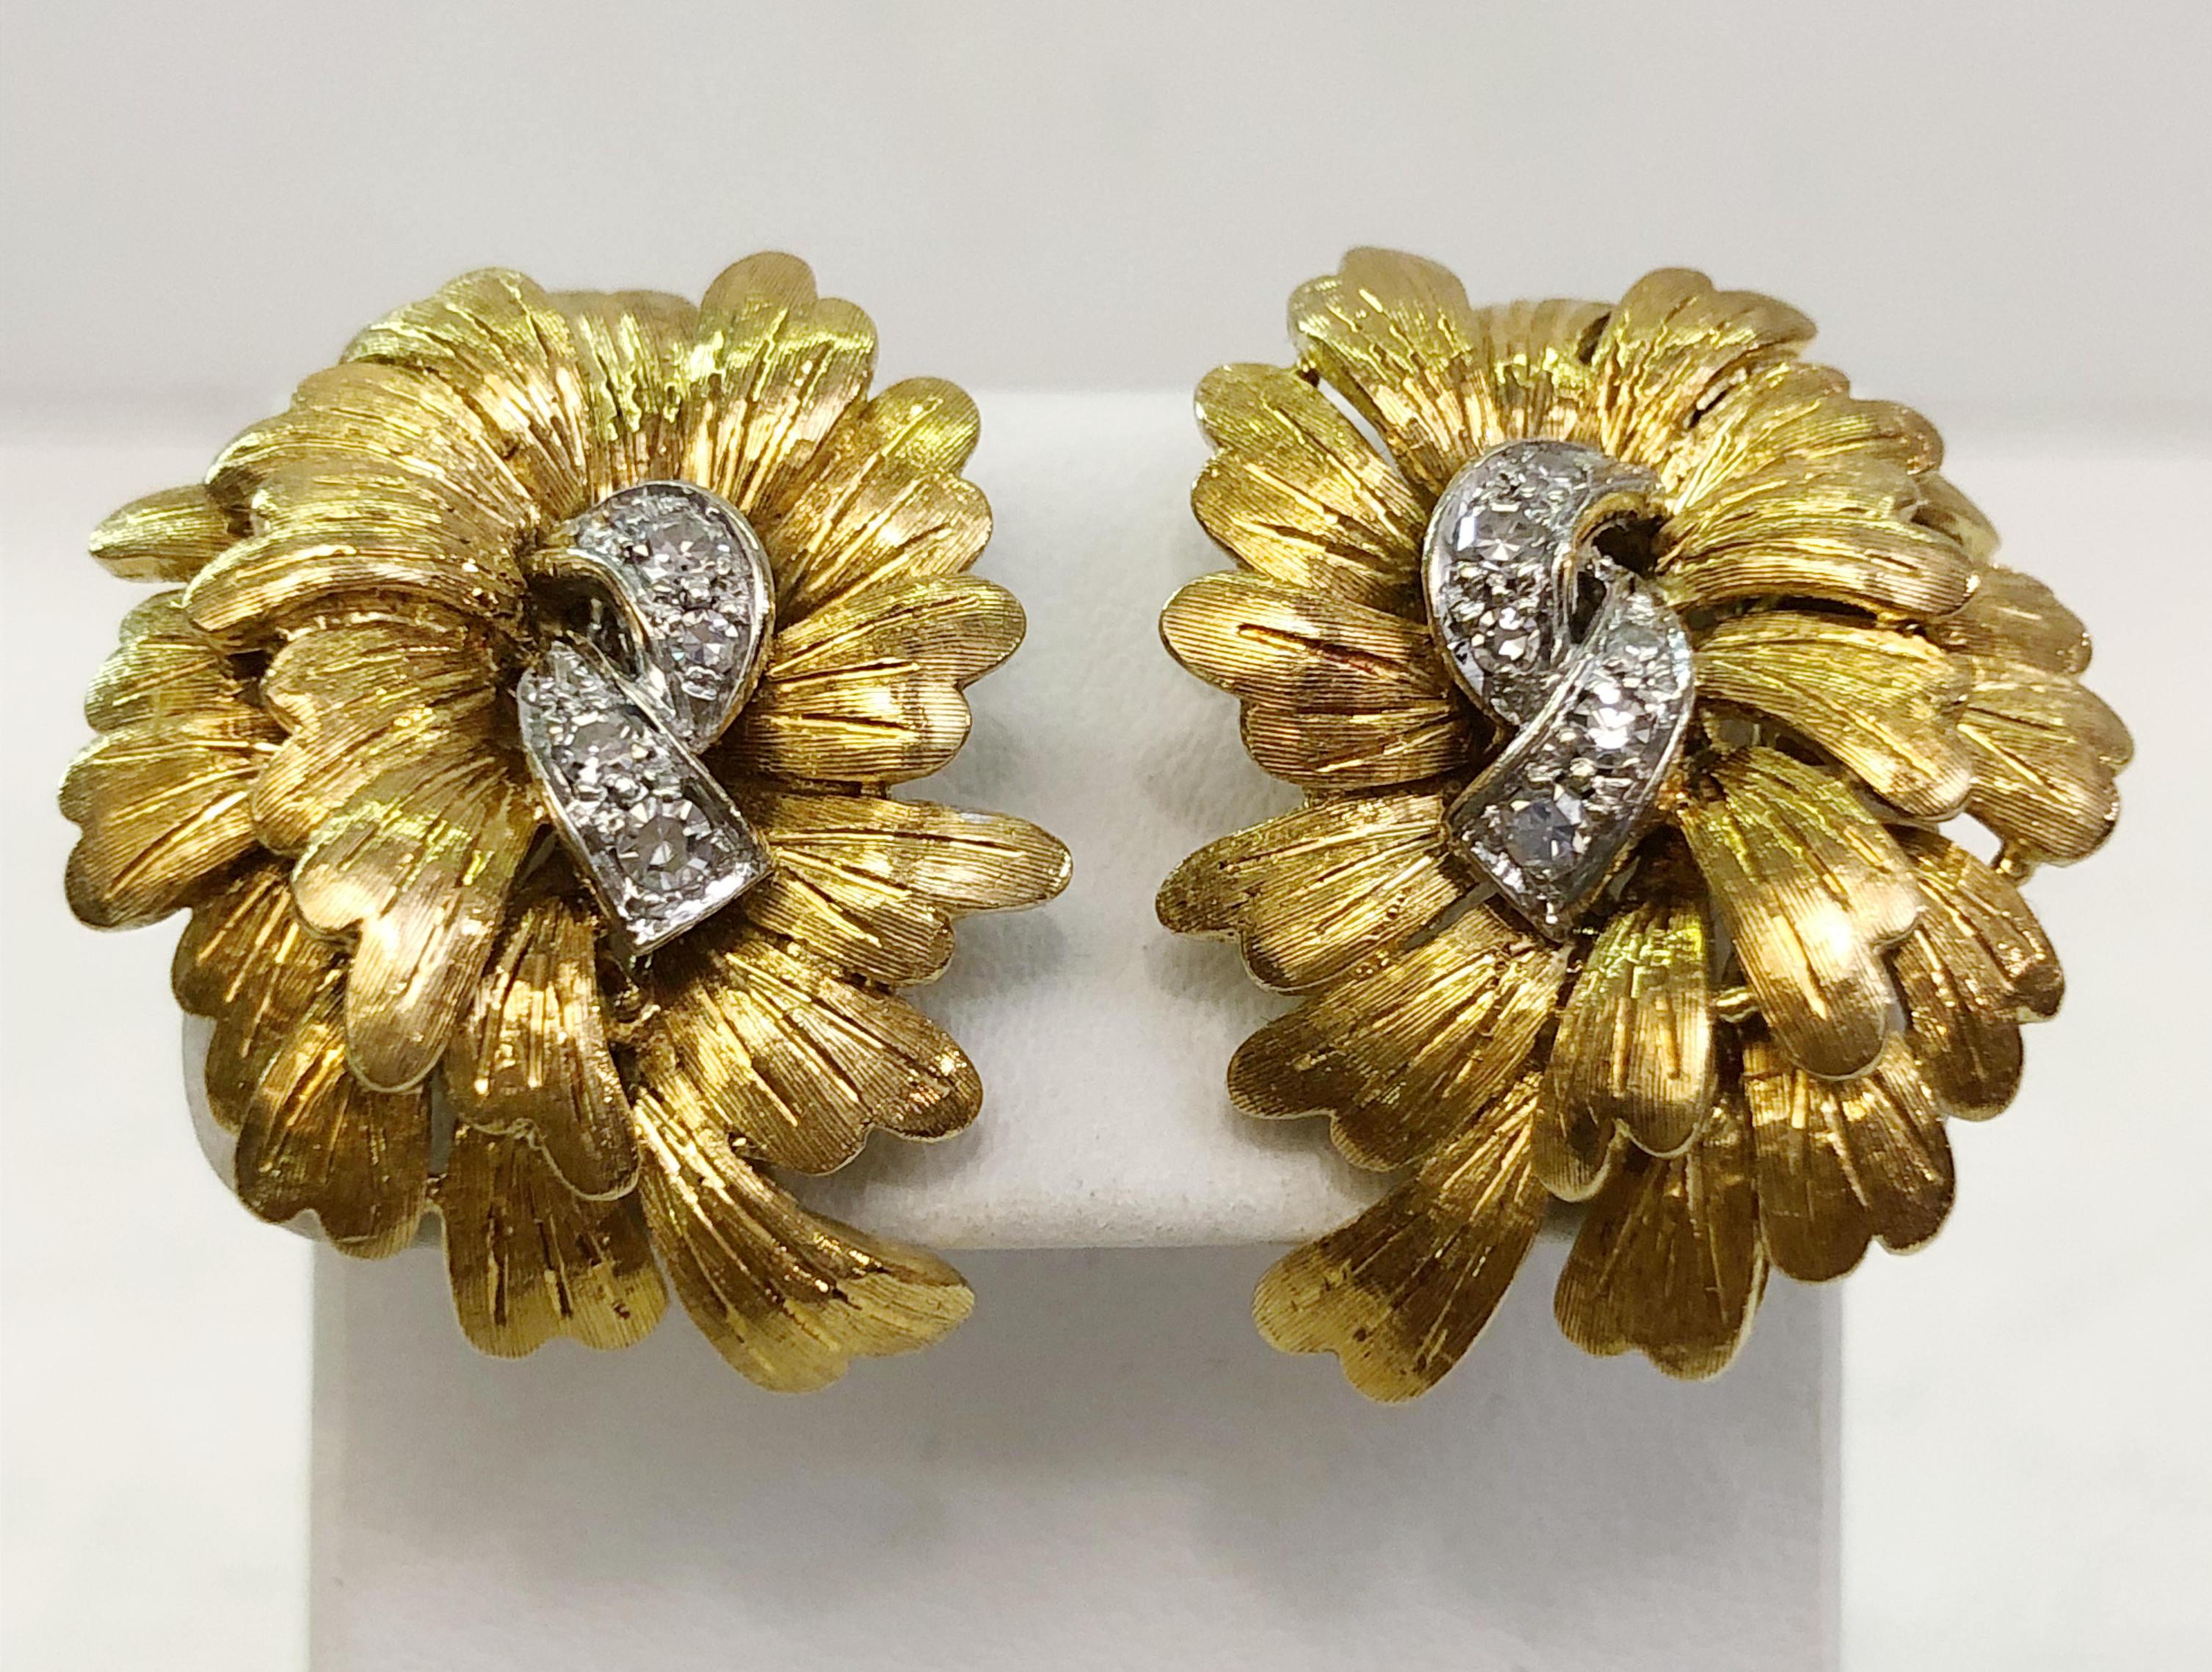 Pair of vintage earrings with 18 karat yellow gold in leaf motif and white gold and diamonds in the center, Buccellati model / Made in Italy 1980s